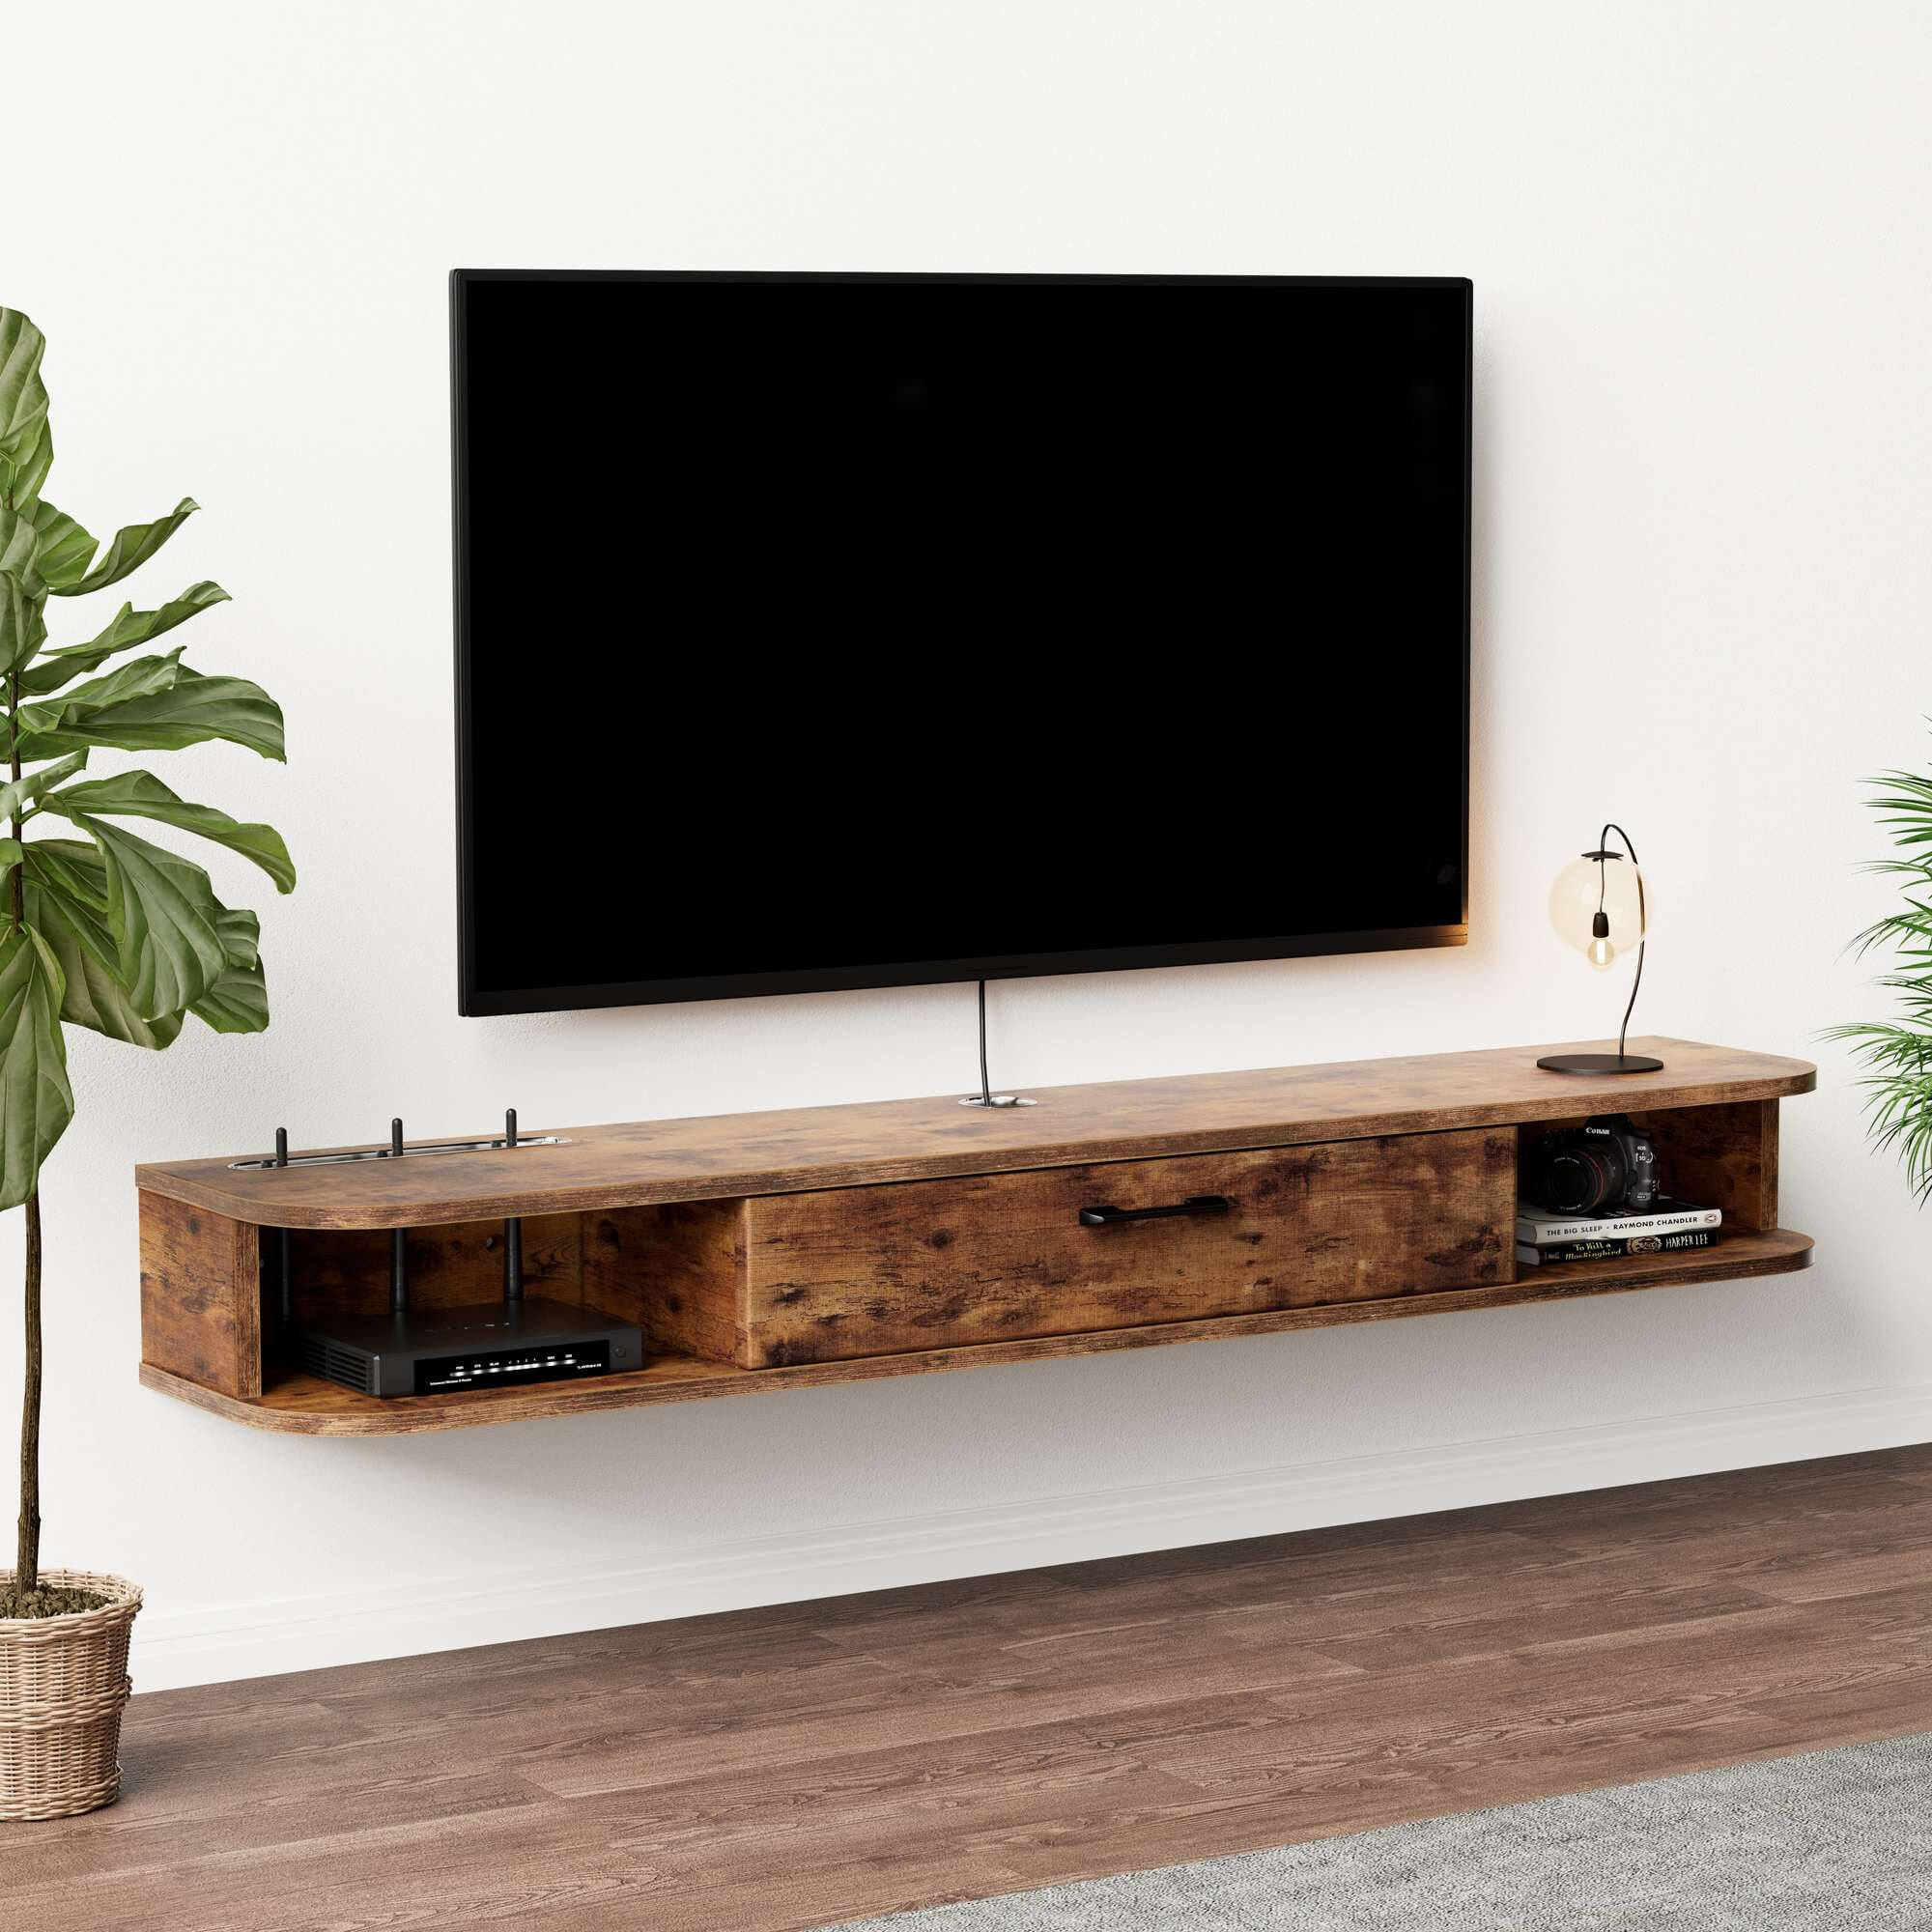 55.12" Rustic Brown Slim Floating TV Stand Wall Shelf, up to 60" TVs